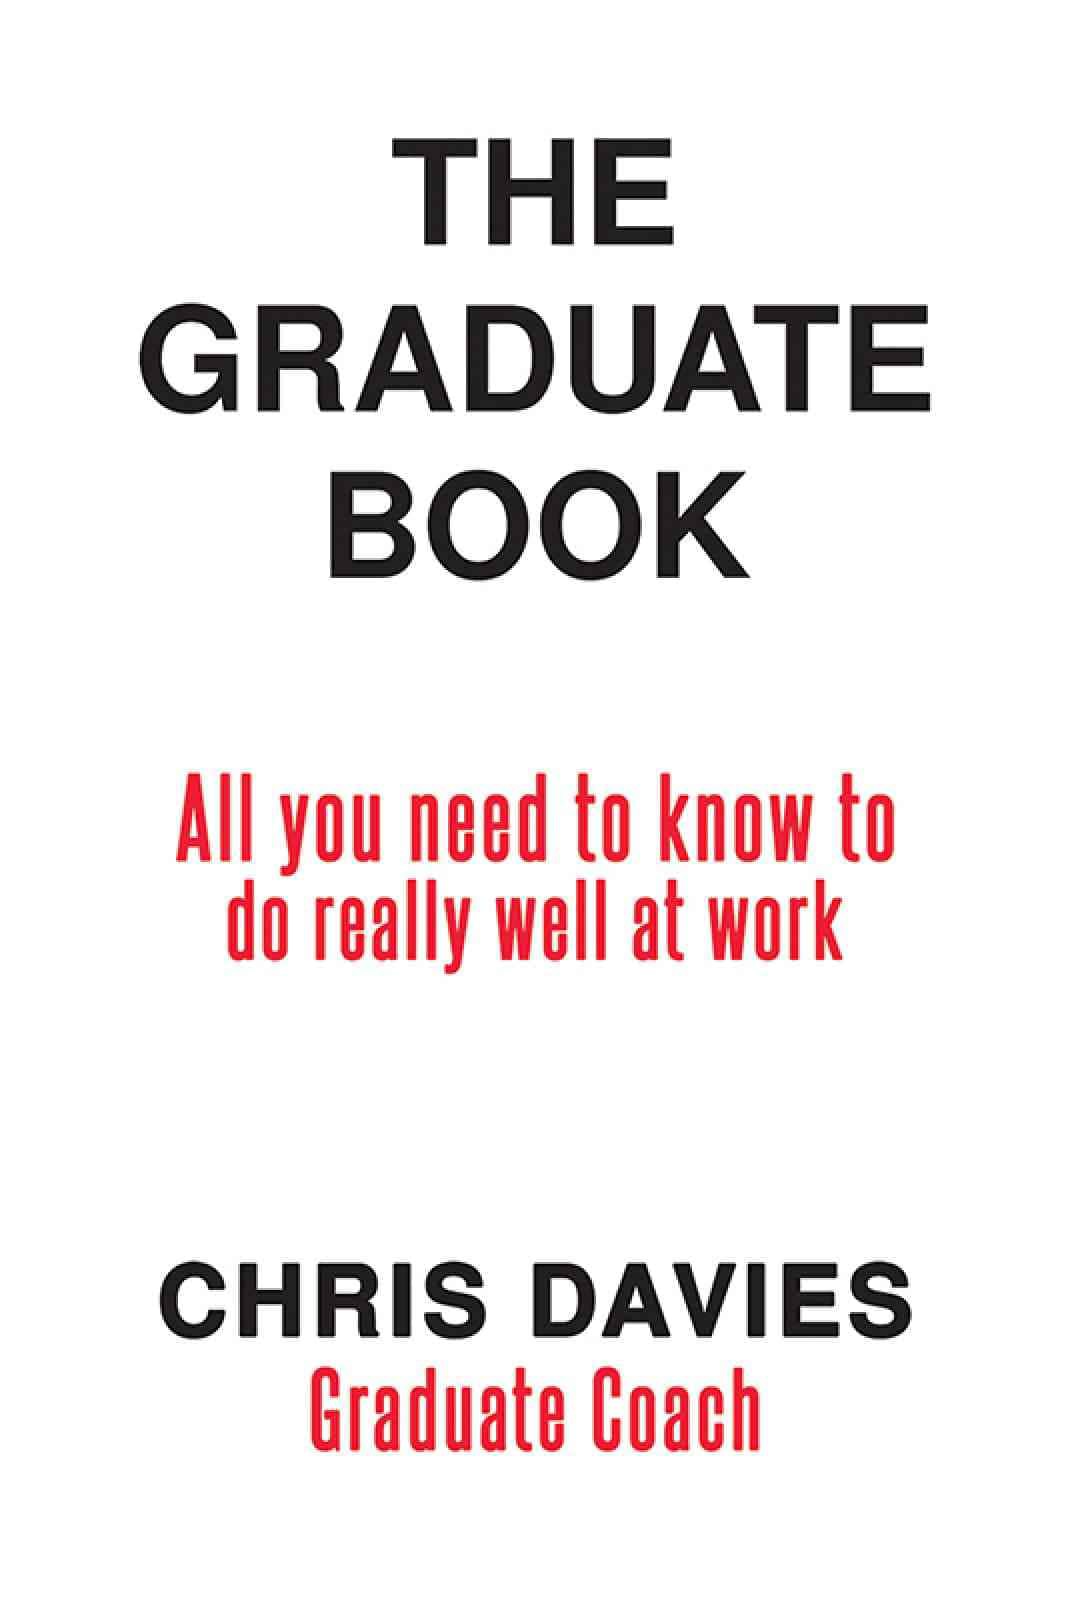 Boove.co.uk Featured Austin Macauley’s Publication The Graduate Book by Chris Davies